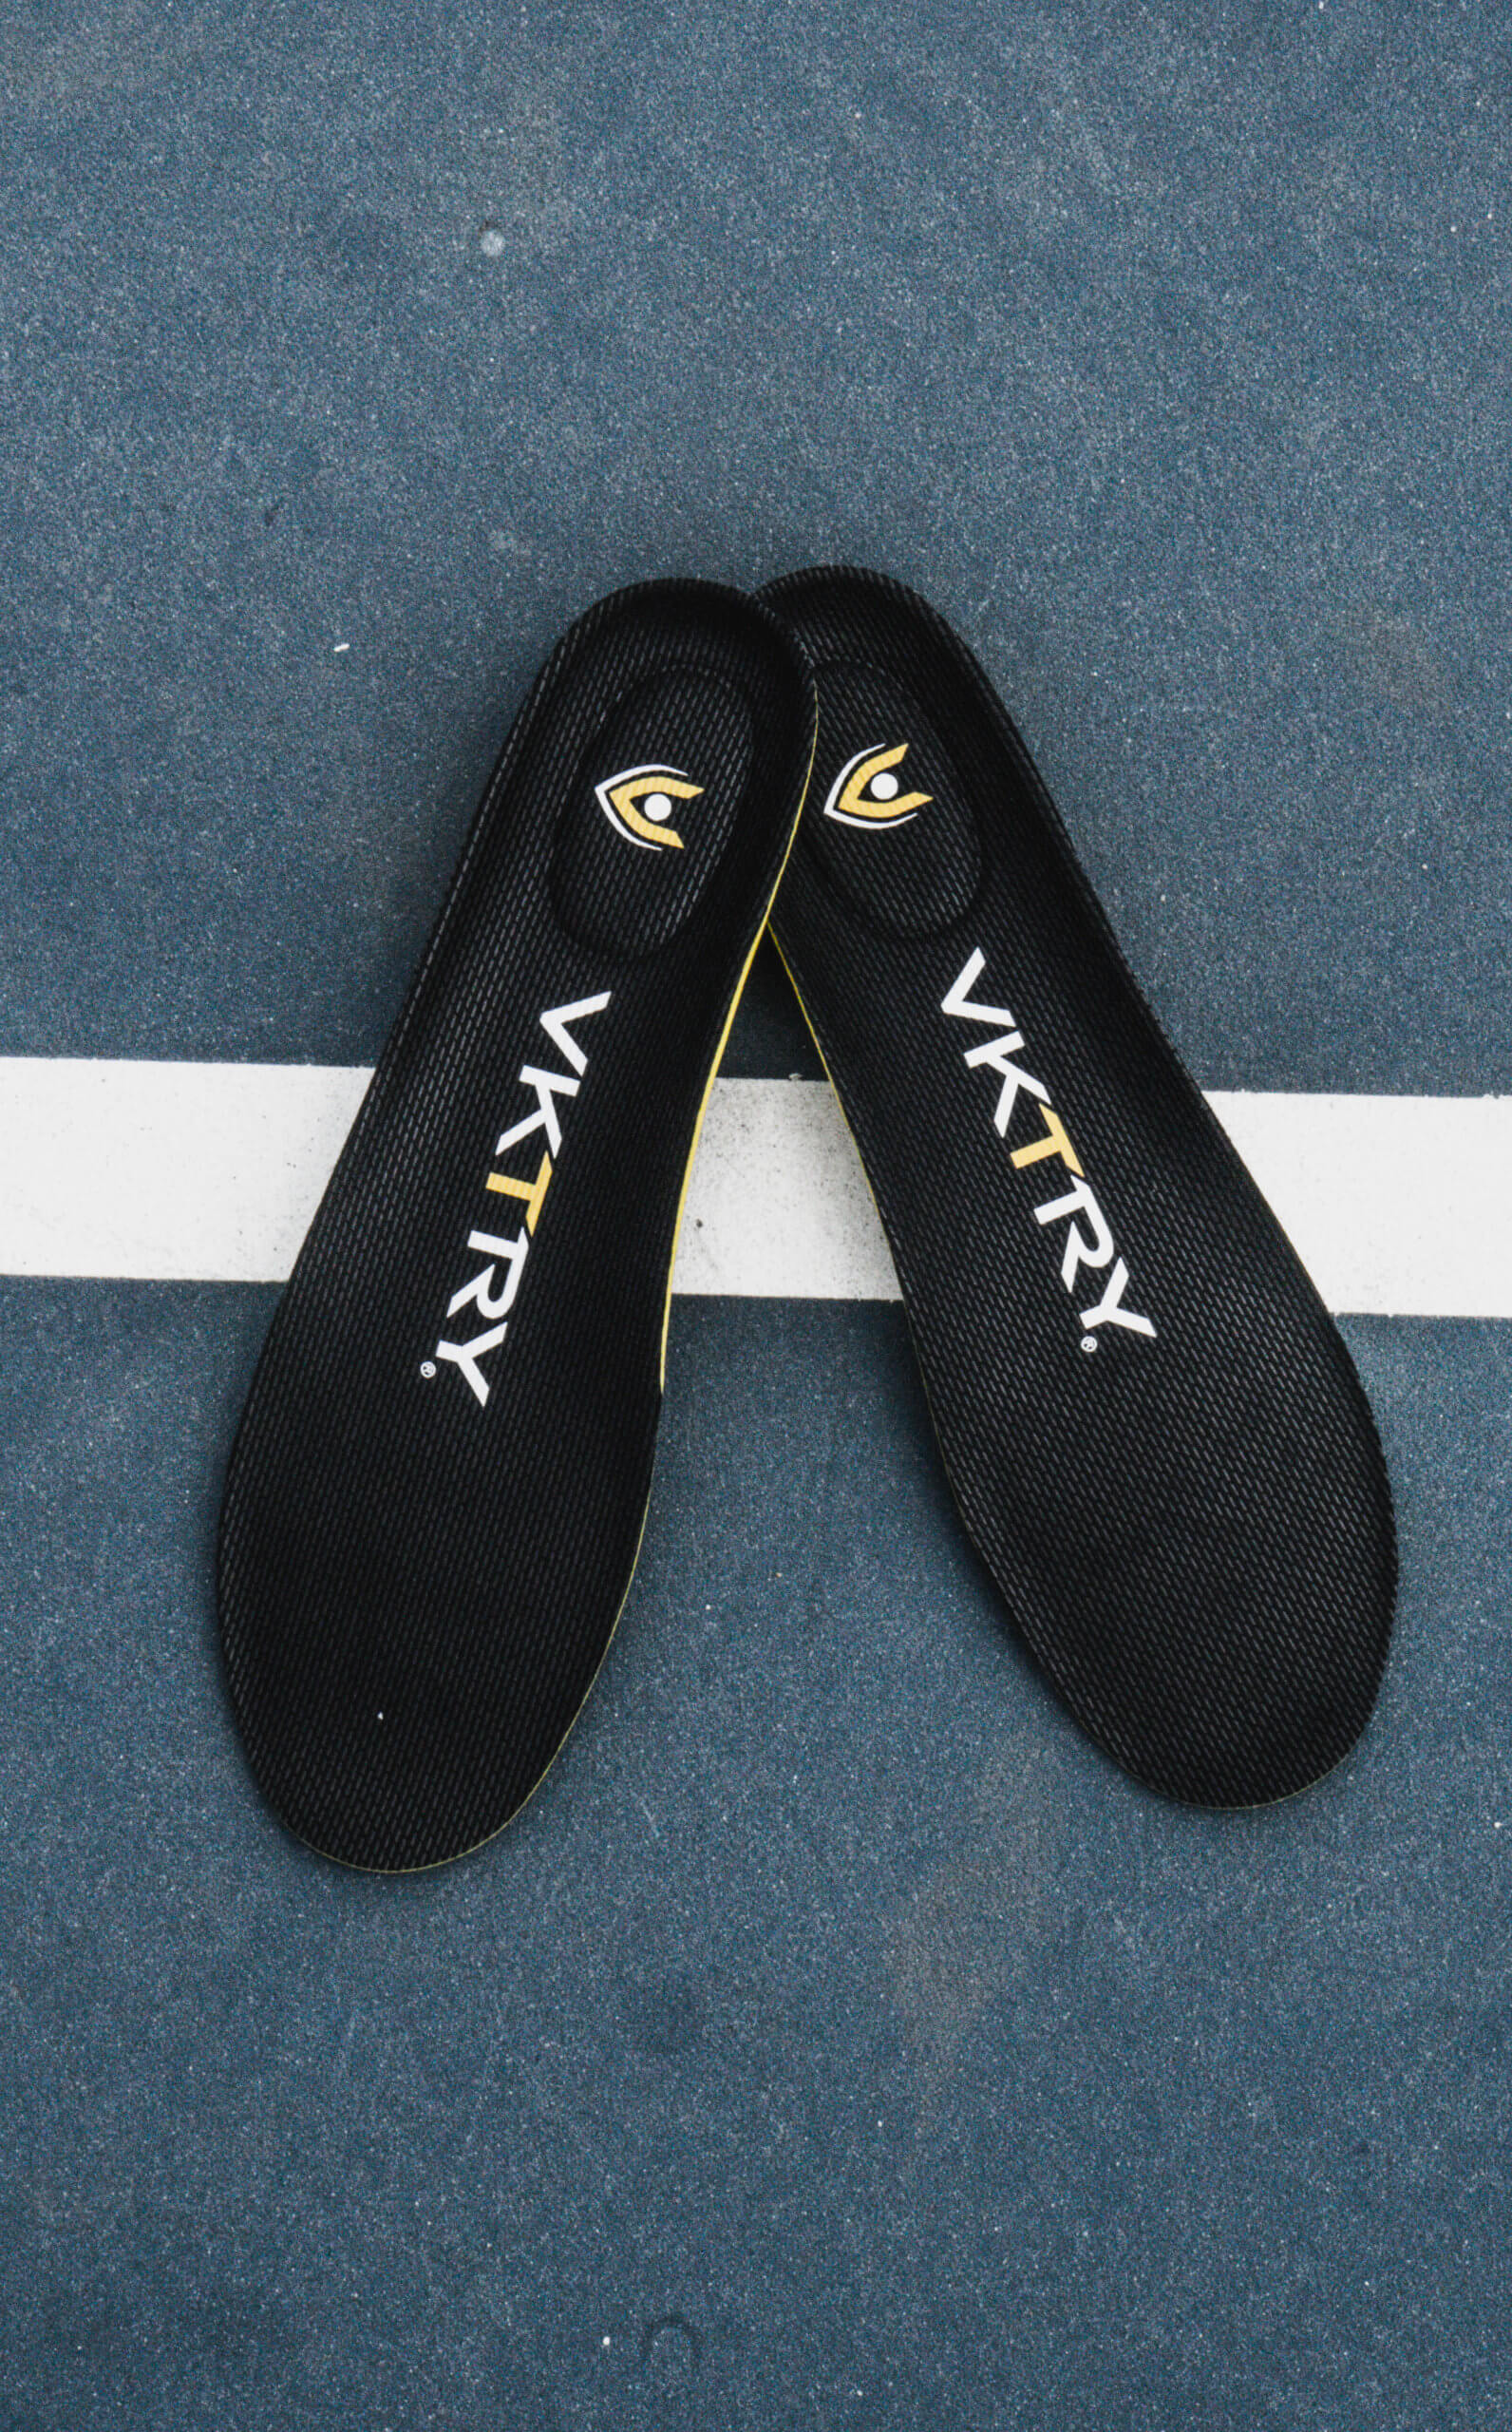 vktry performance insoles